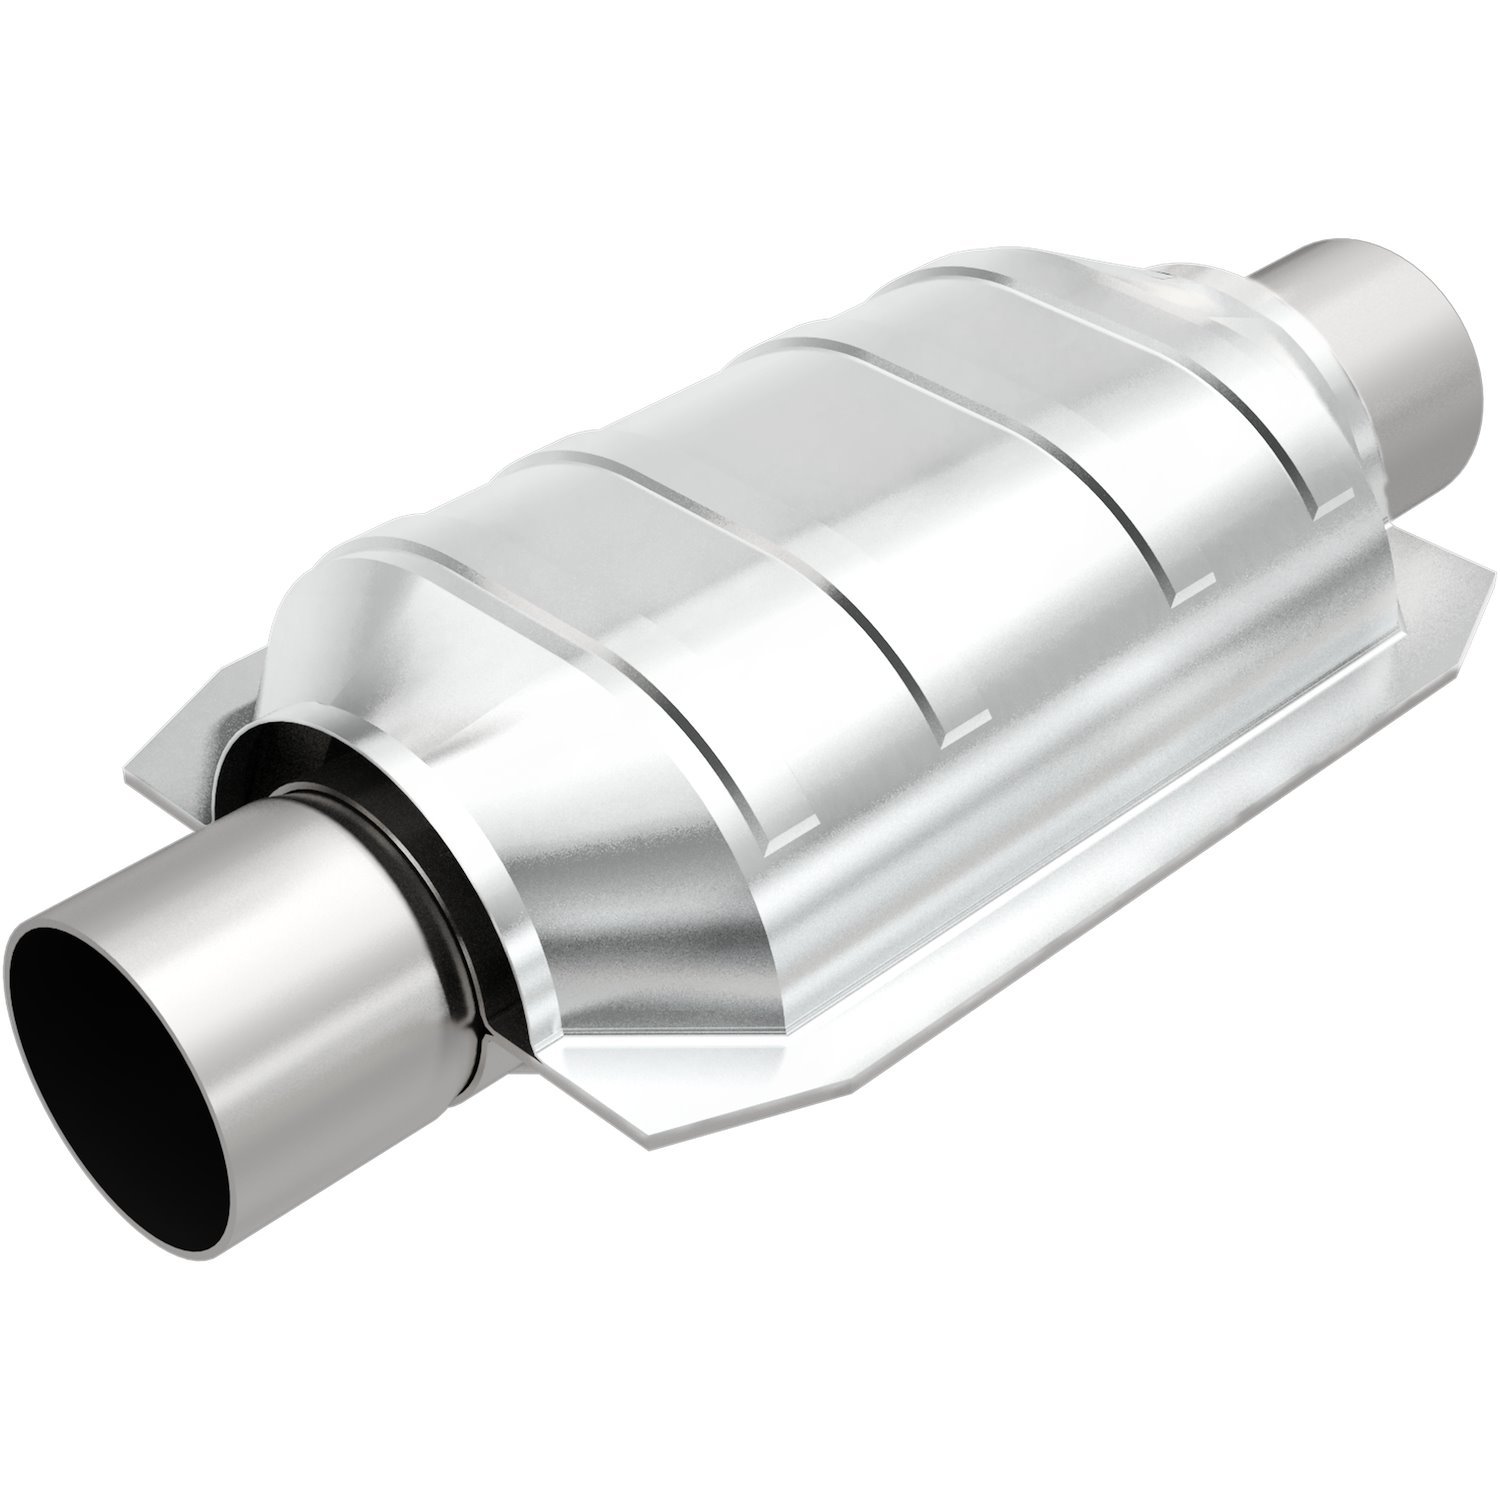 Oval Catalytic Converter 2.25" Inlet/Outlet Diameter 13" Overall Length 9" Body Length 6.5" Wide